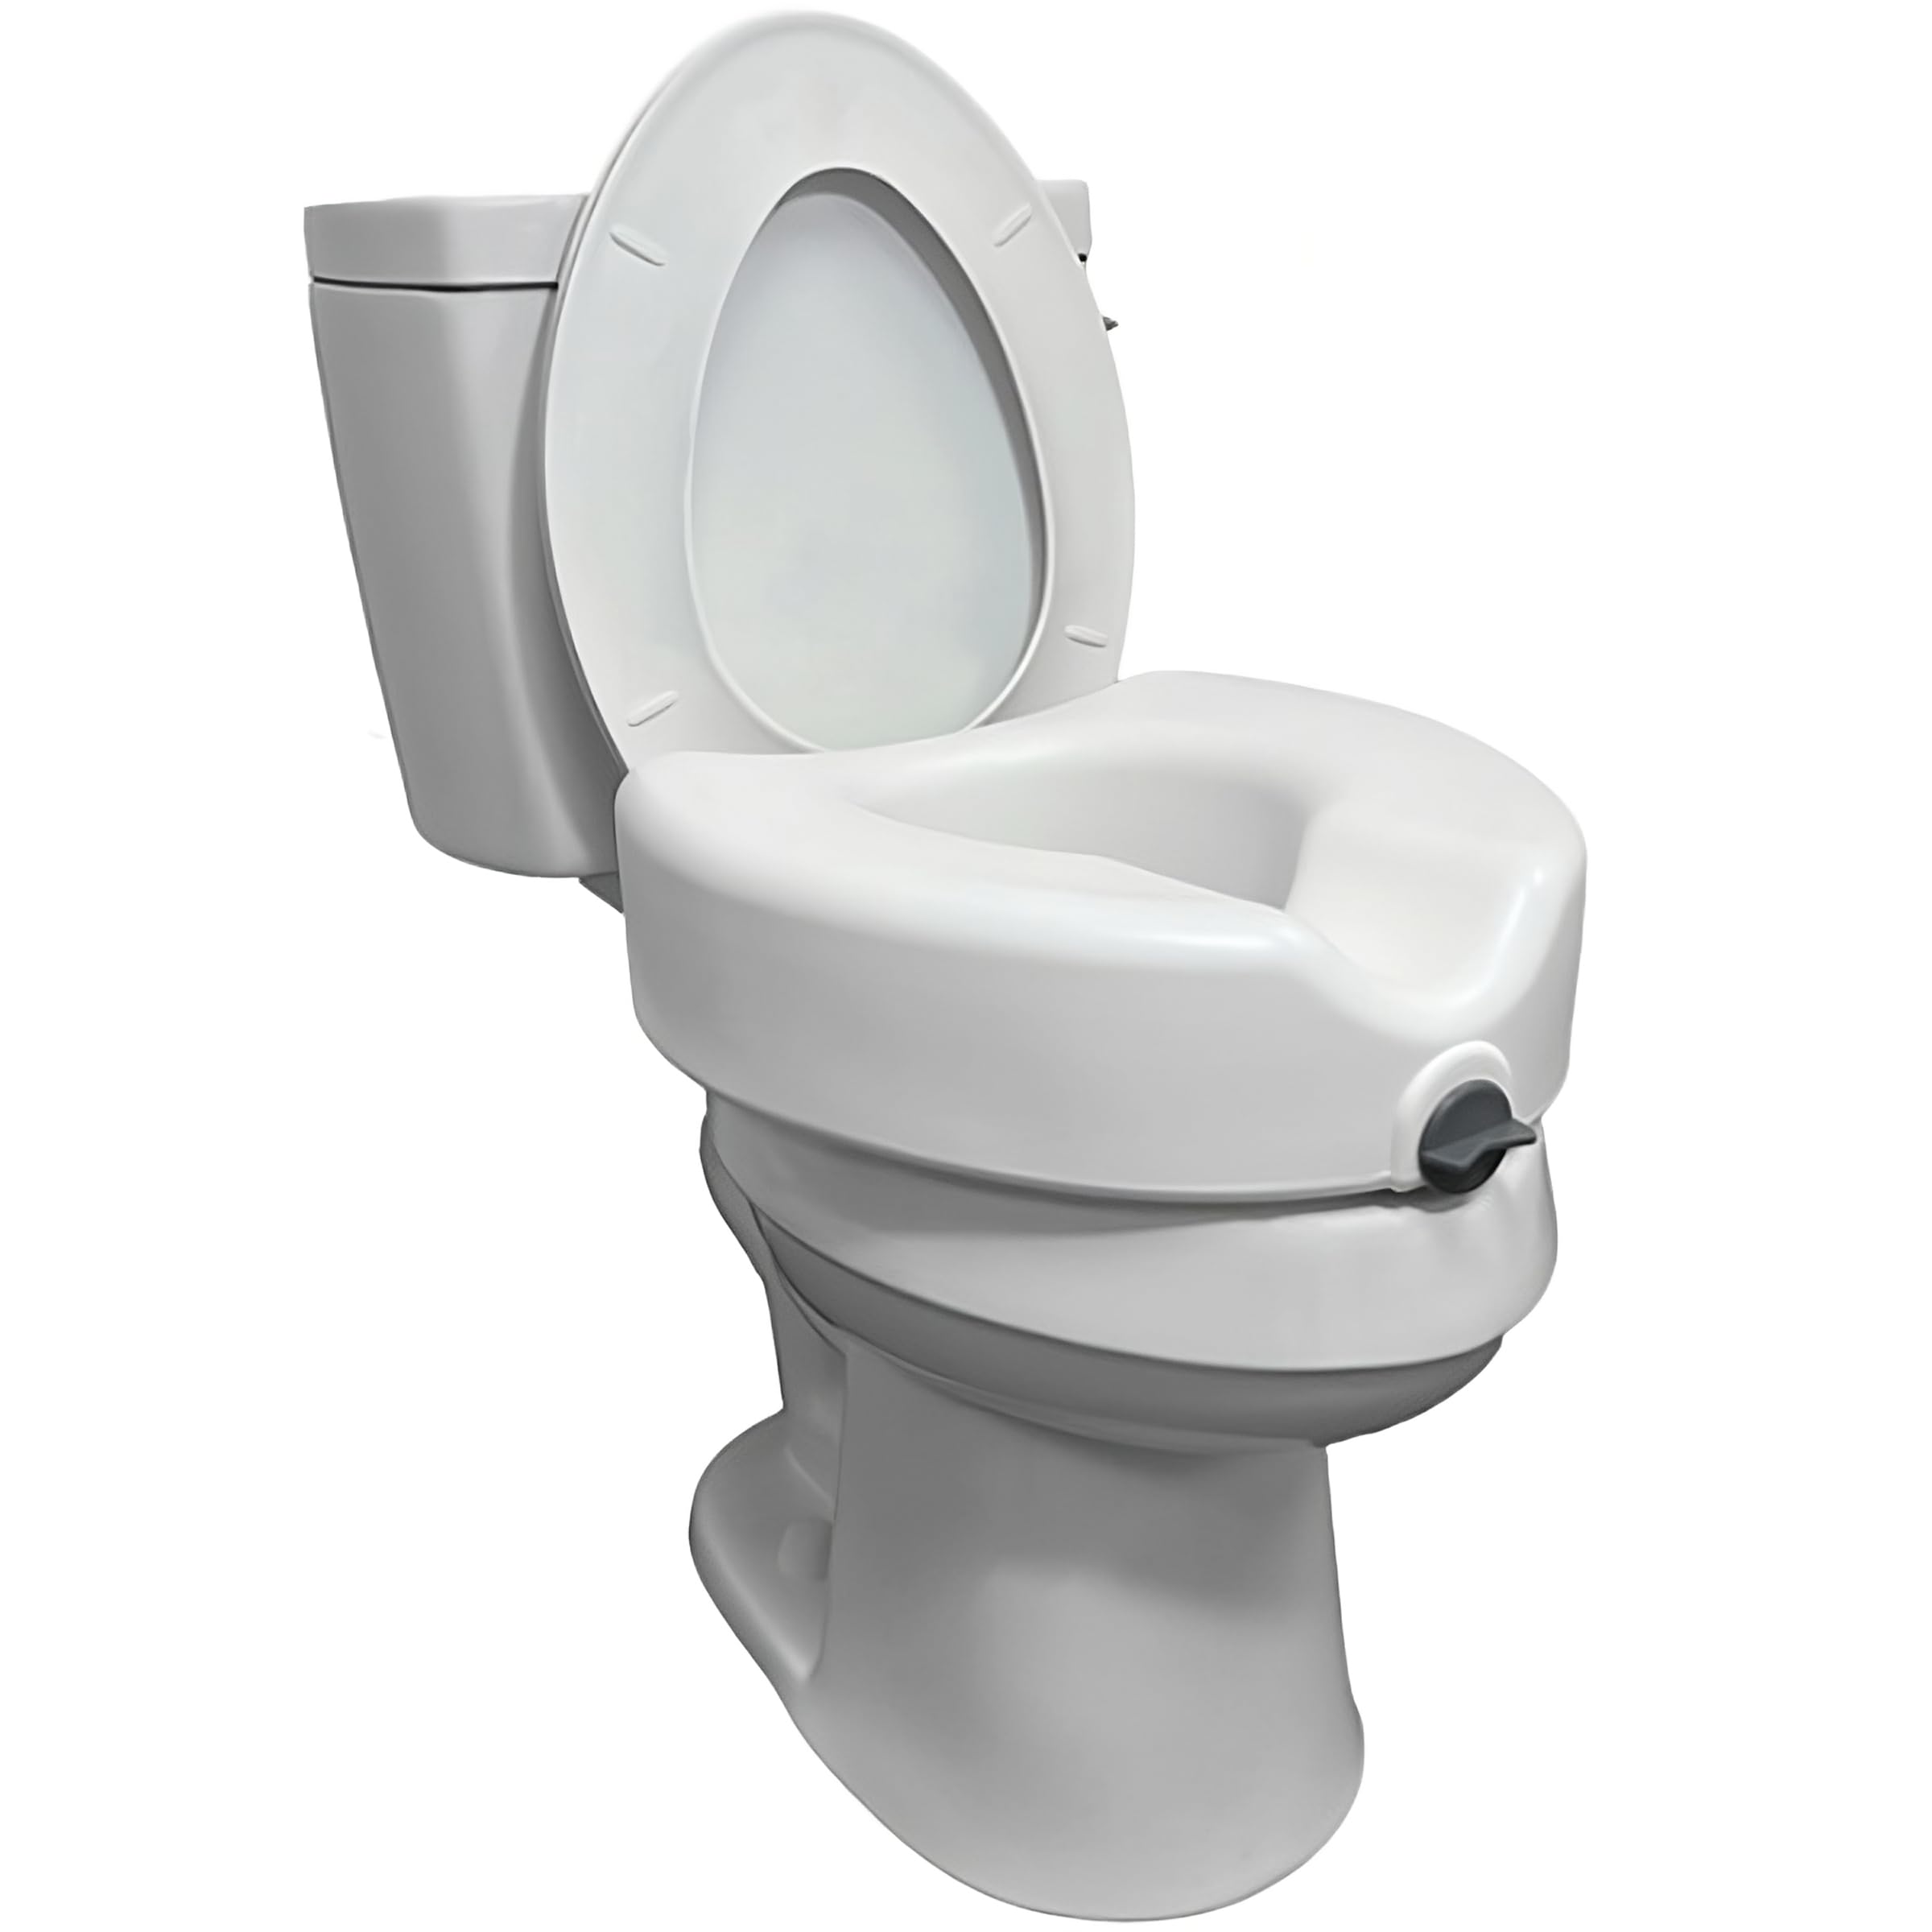 ProBasics Raised Toilet Seat For Seniors With Safety Lock, Round or Elongated Toilets, Secure Locking Mechanism, 4.5